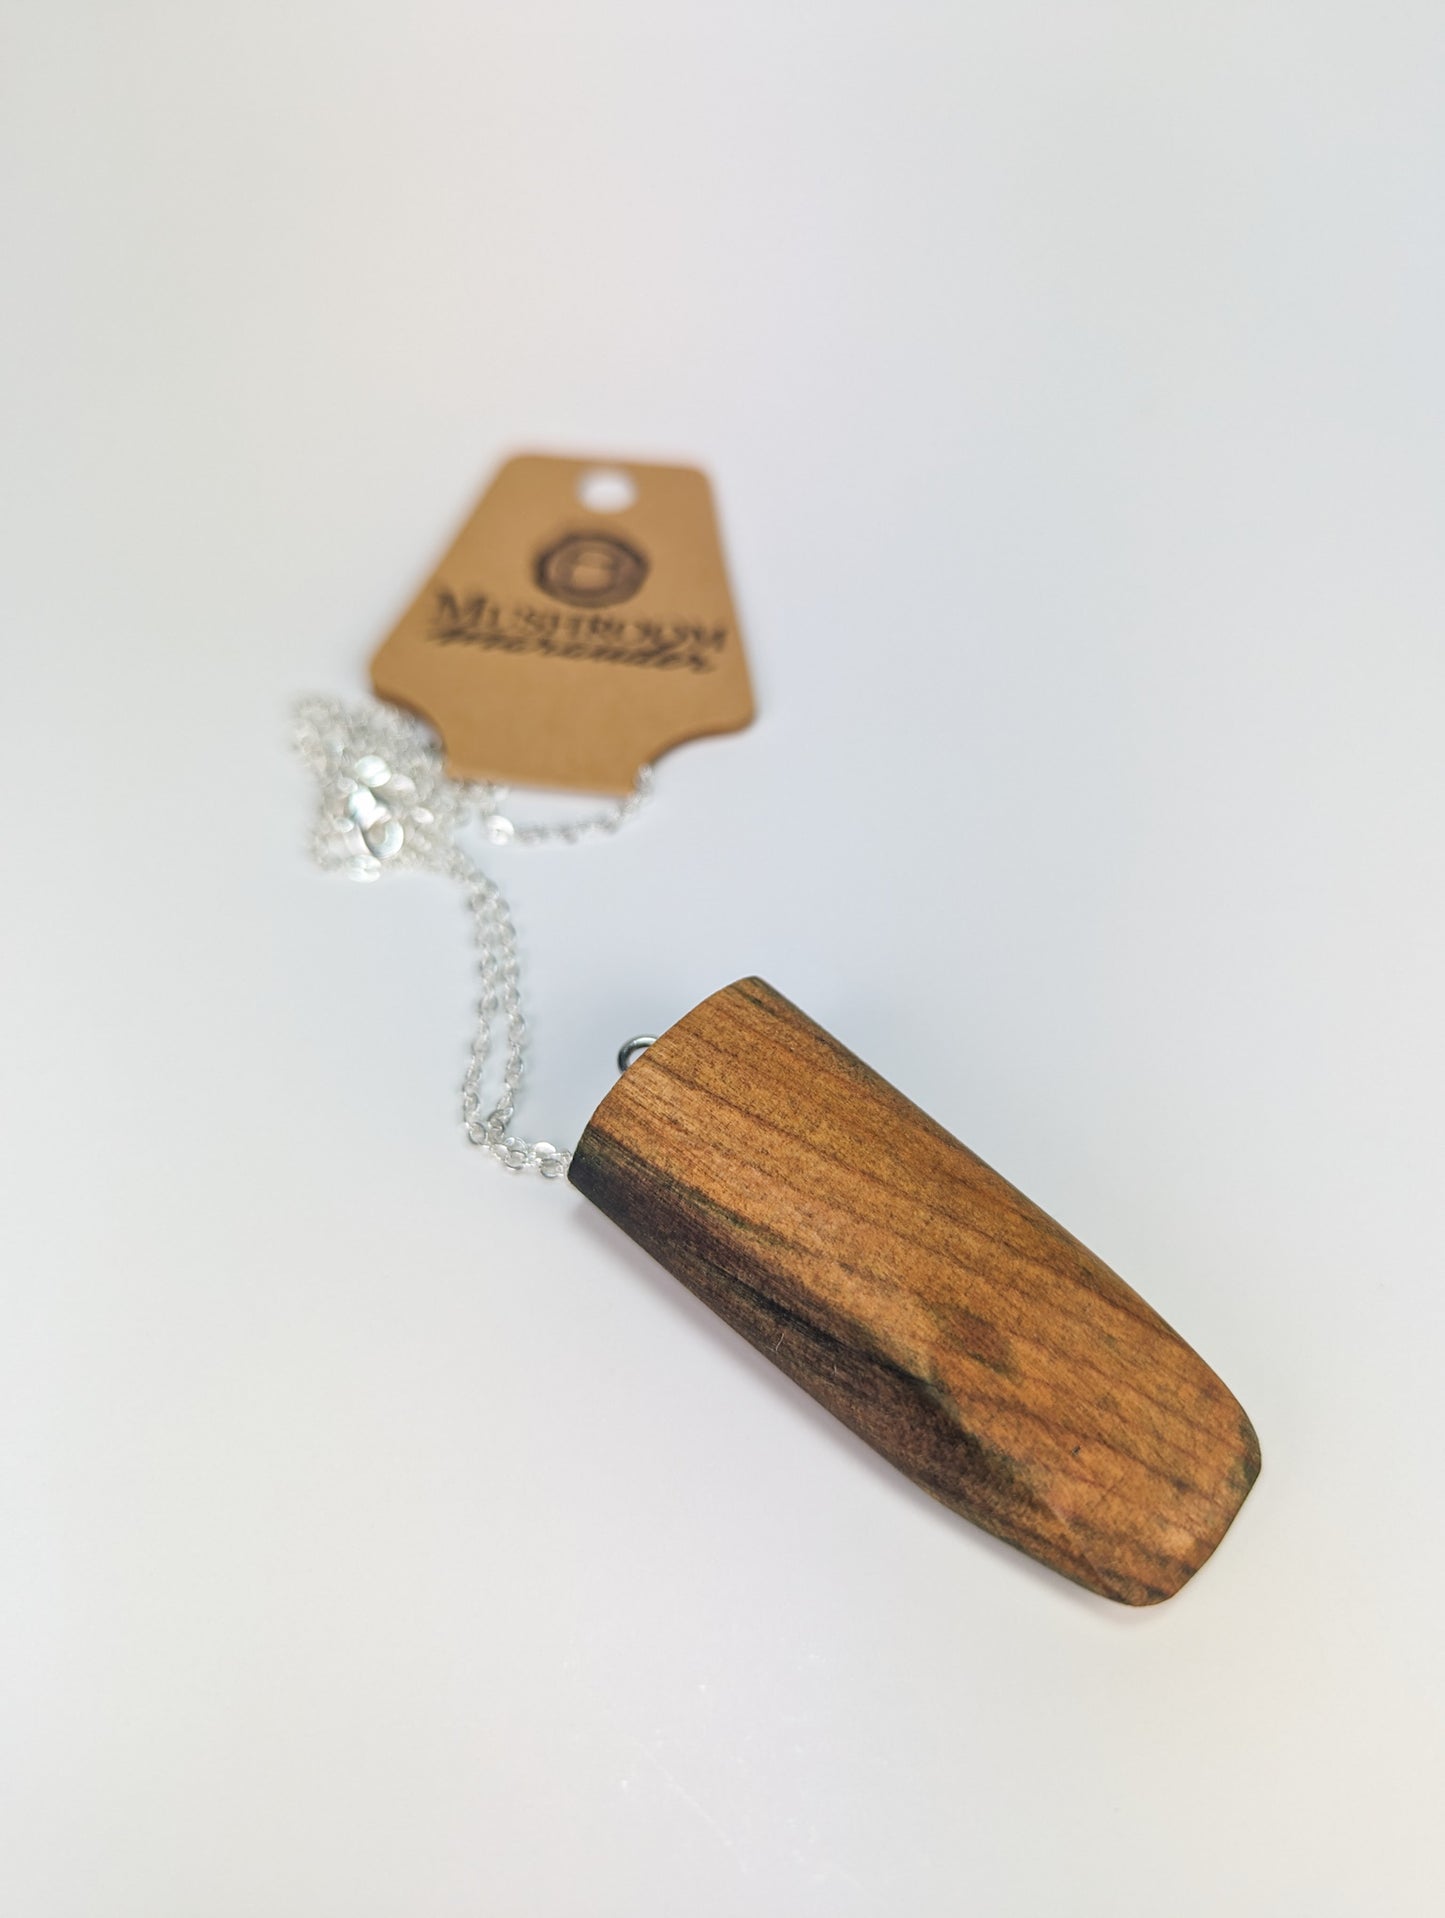 Naturally Fungus-Stained Wooden Pendant | Pointed Slab